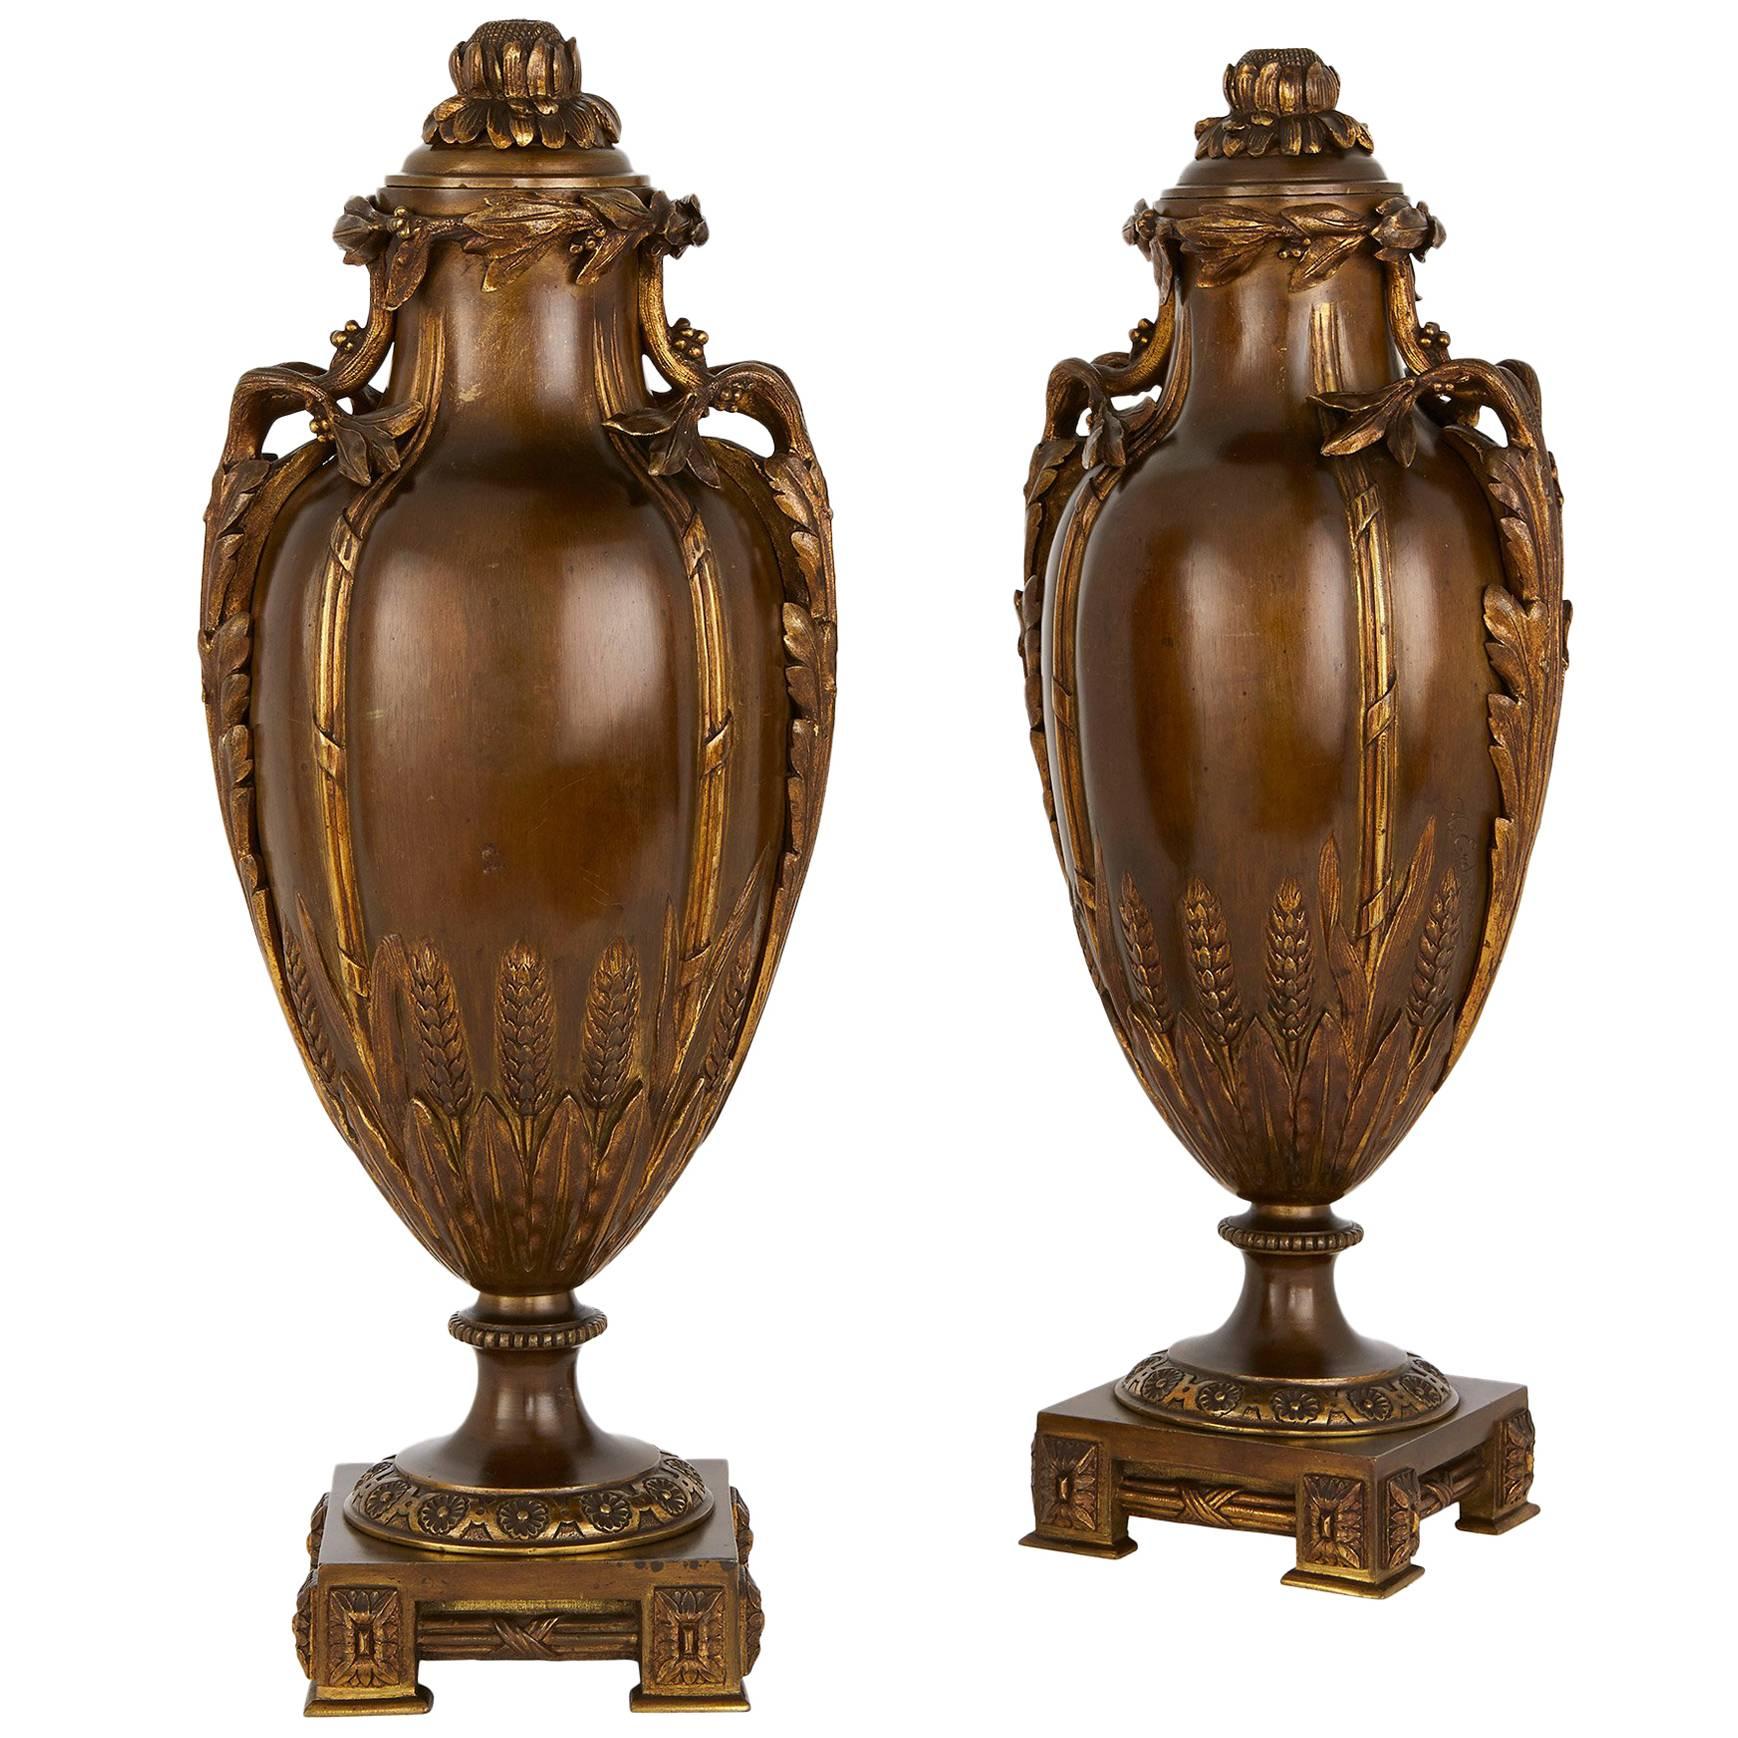 Pair of Gilt and Patinated Bronze Lidded Antique Vases